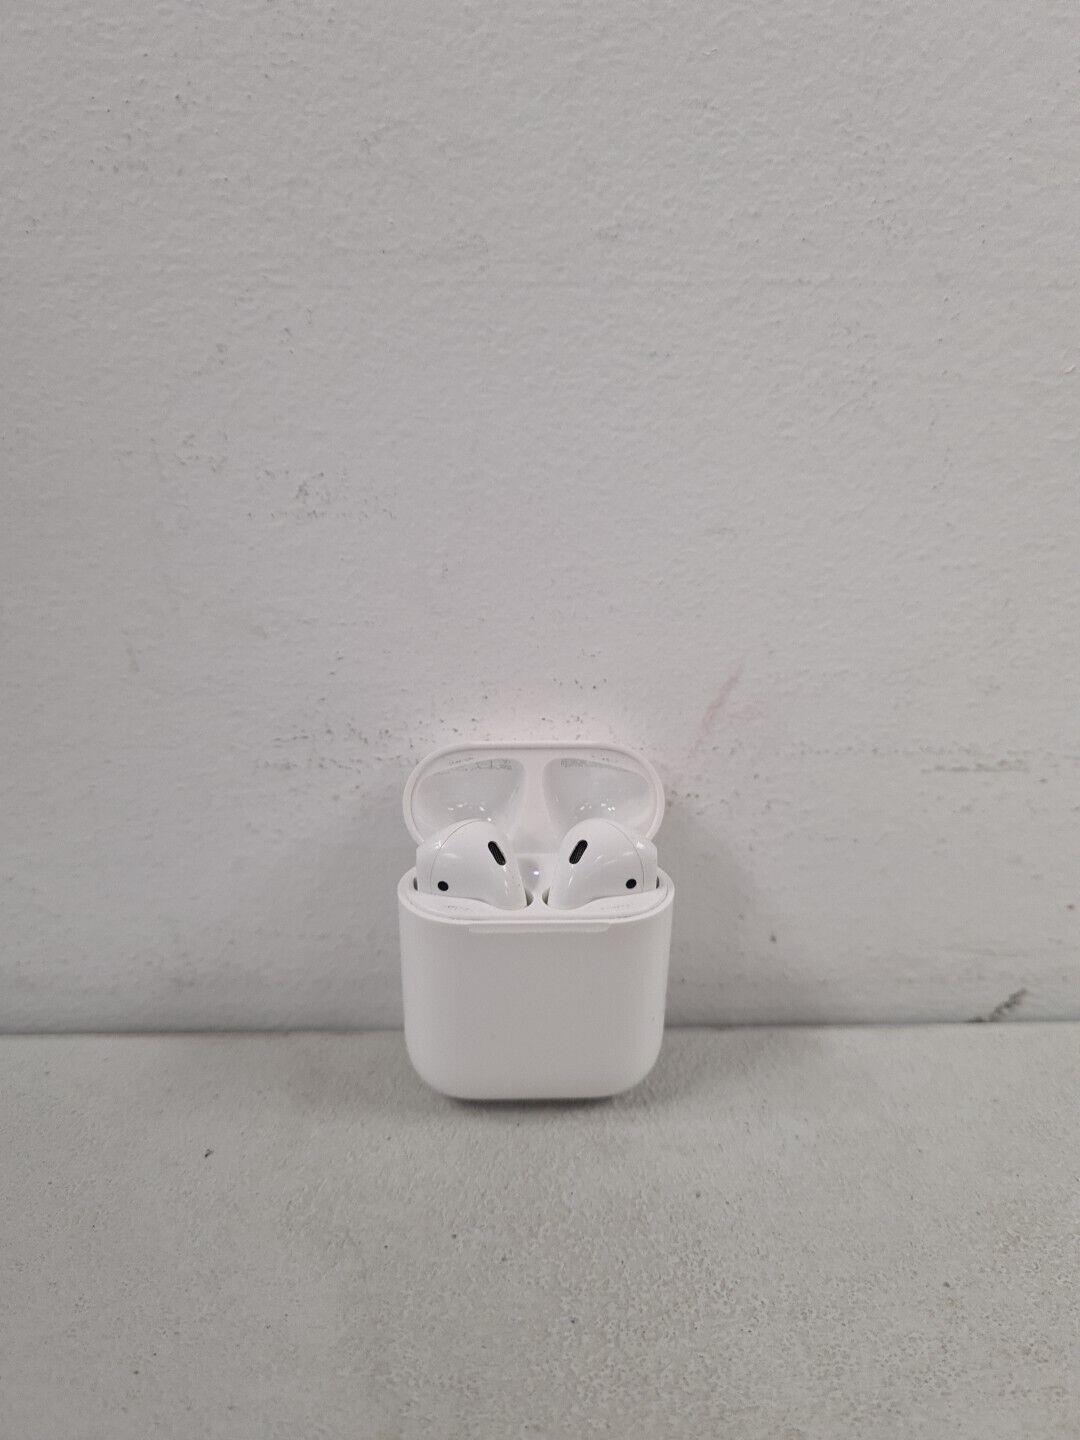 Apple Airpods (2nd Gen) With Charging Case C-grade (free Shipping)